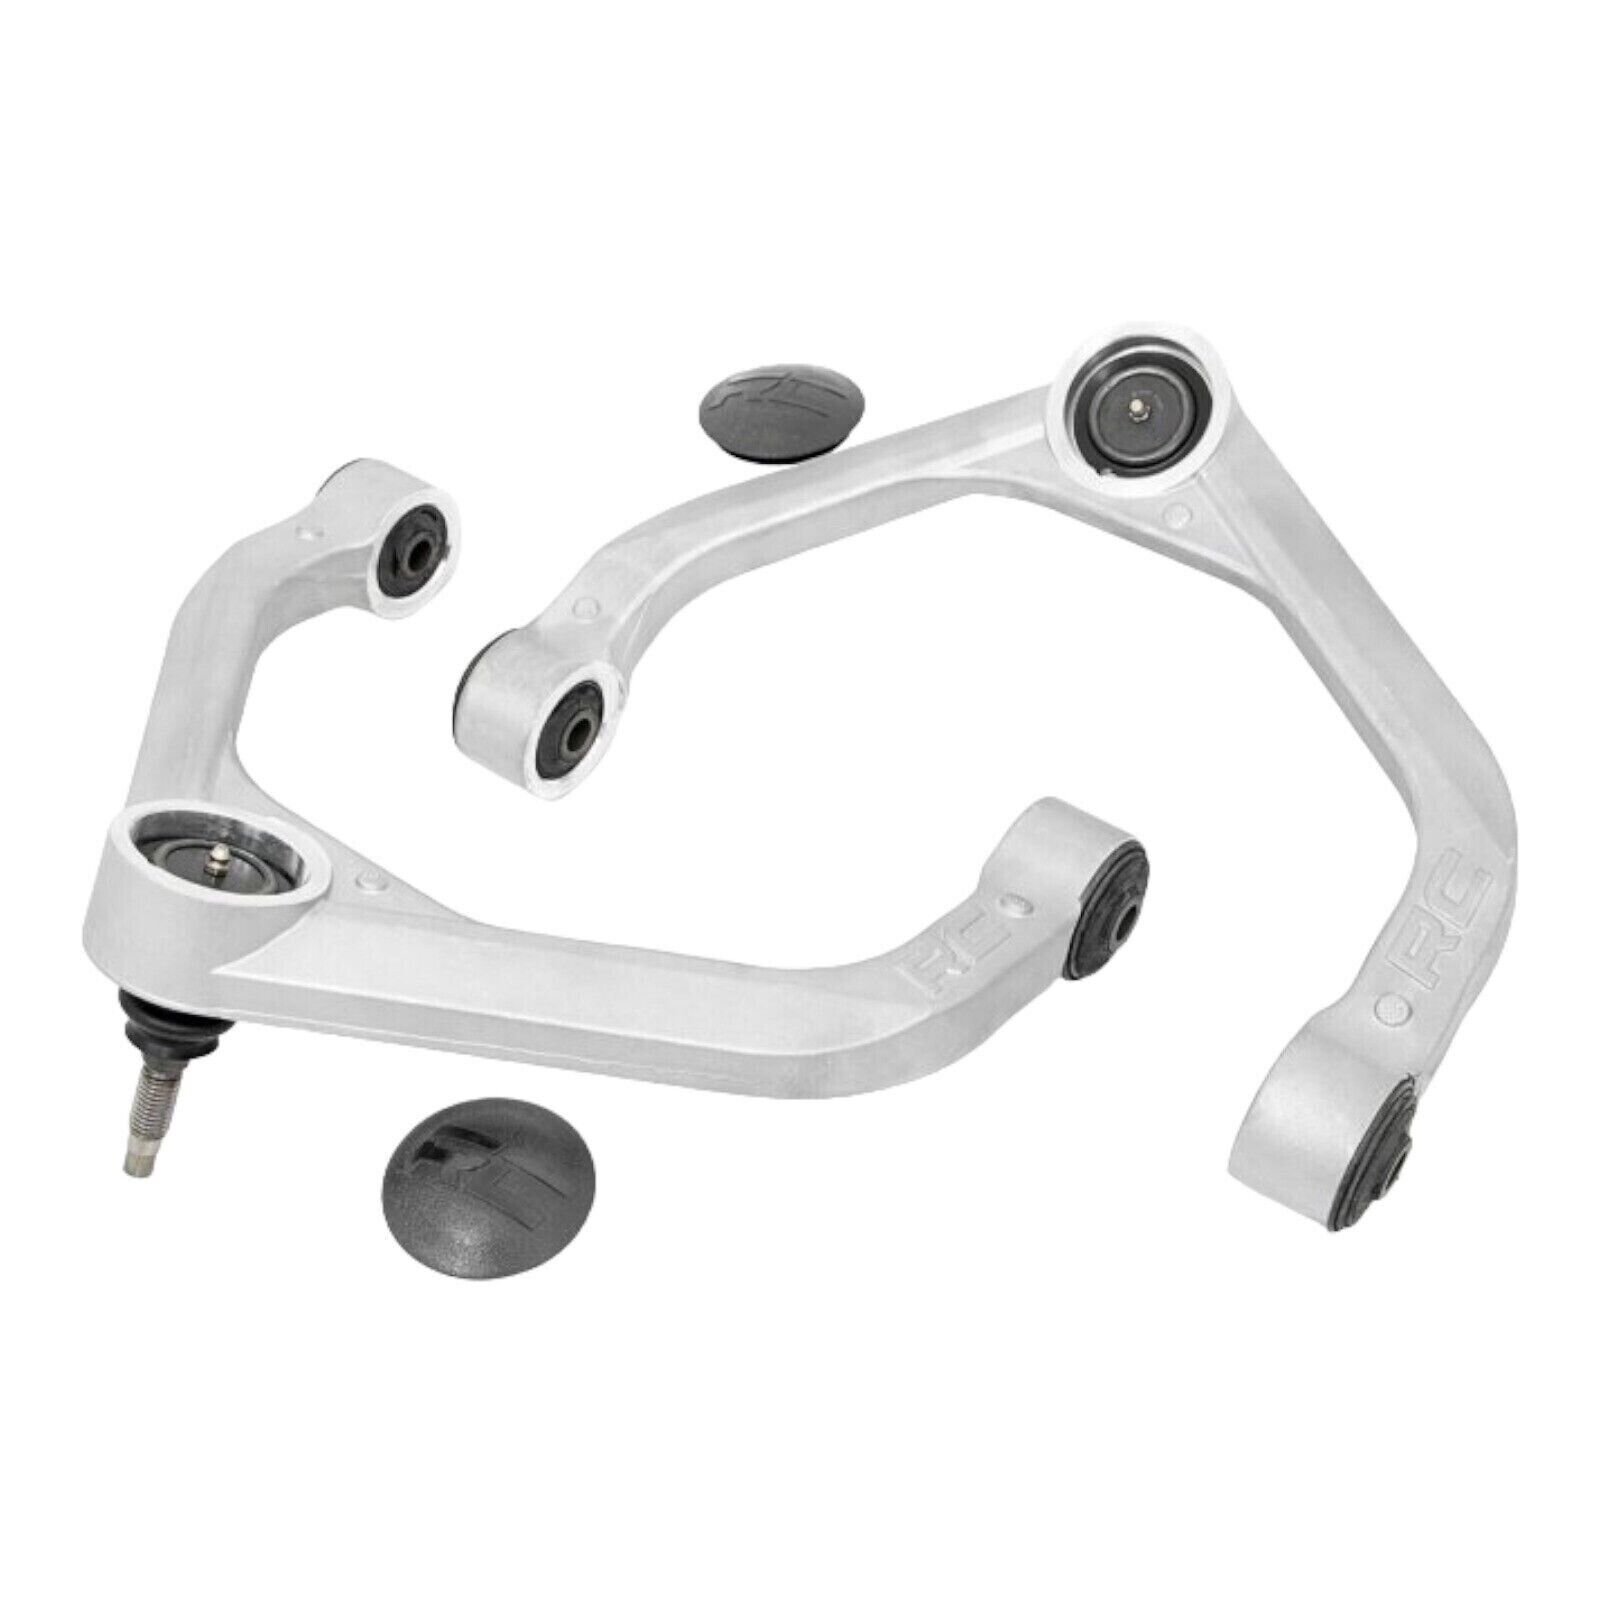 Rough Country 31402 Durable OEM Forged Aluminum Upper Control Arm for Ram 1500